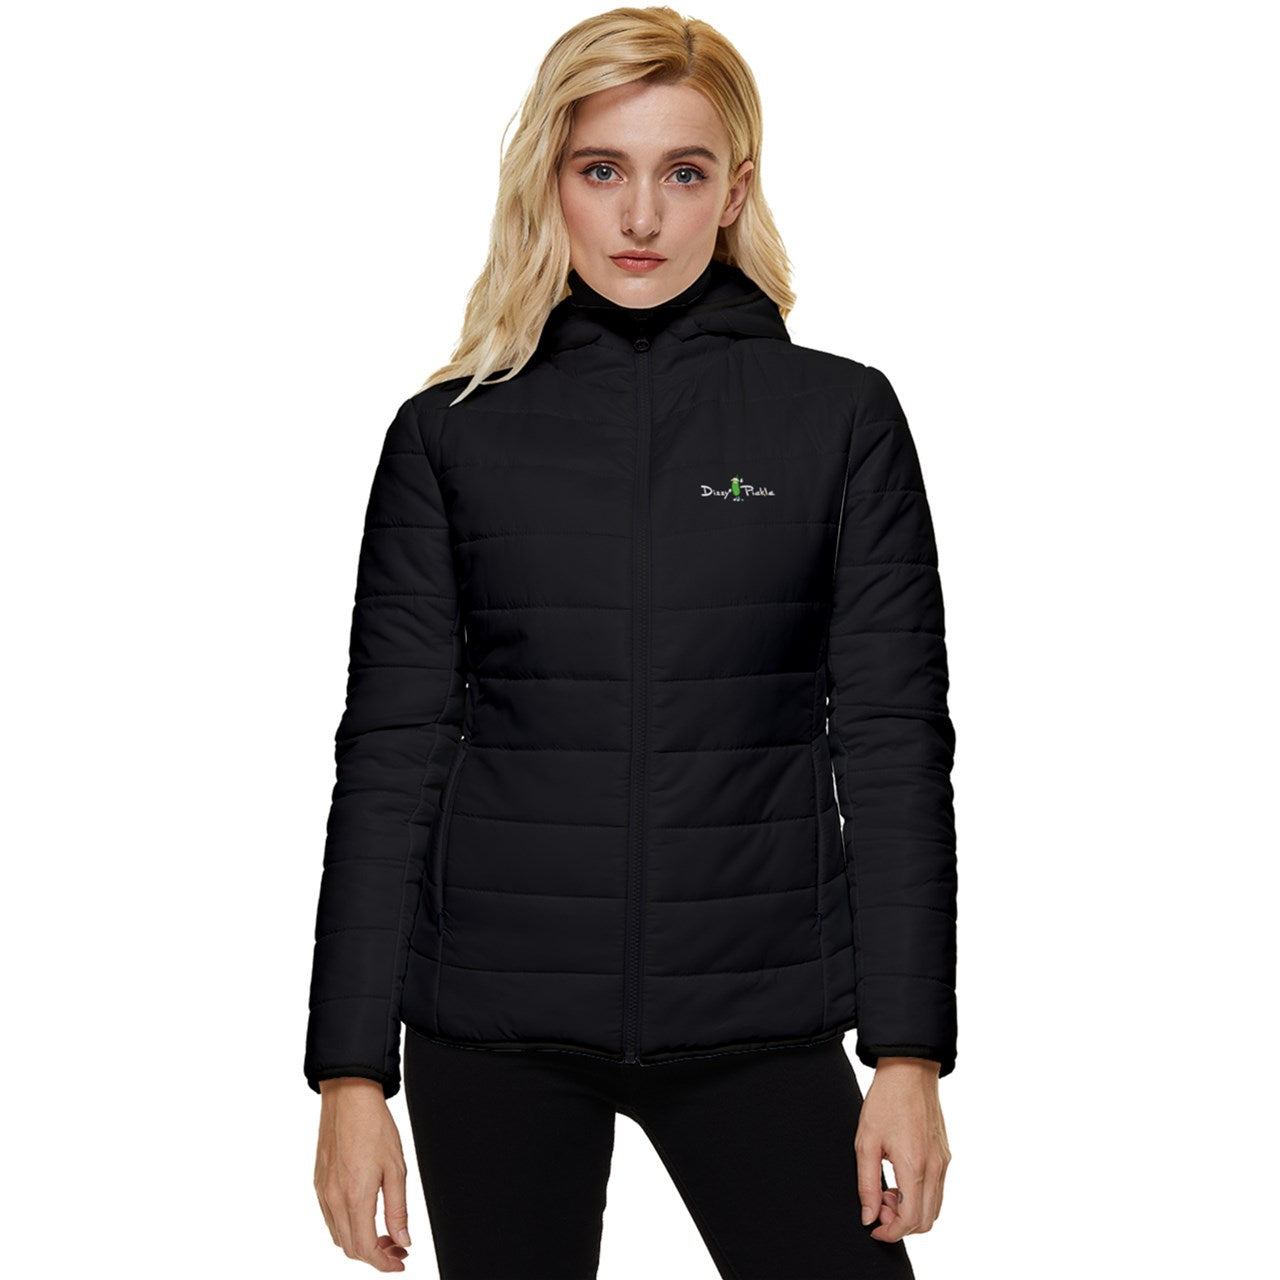 DZY P Classic - Black - Women's Hooded Quilted Jacket by Dizzy Pickle